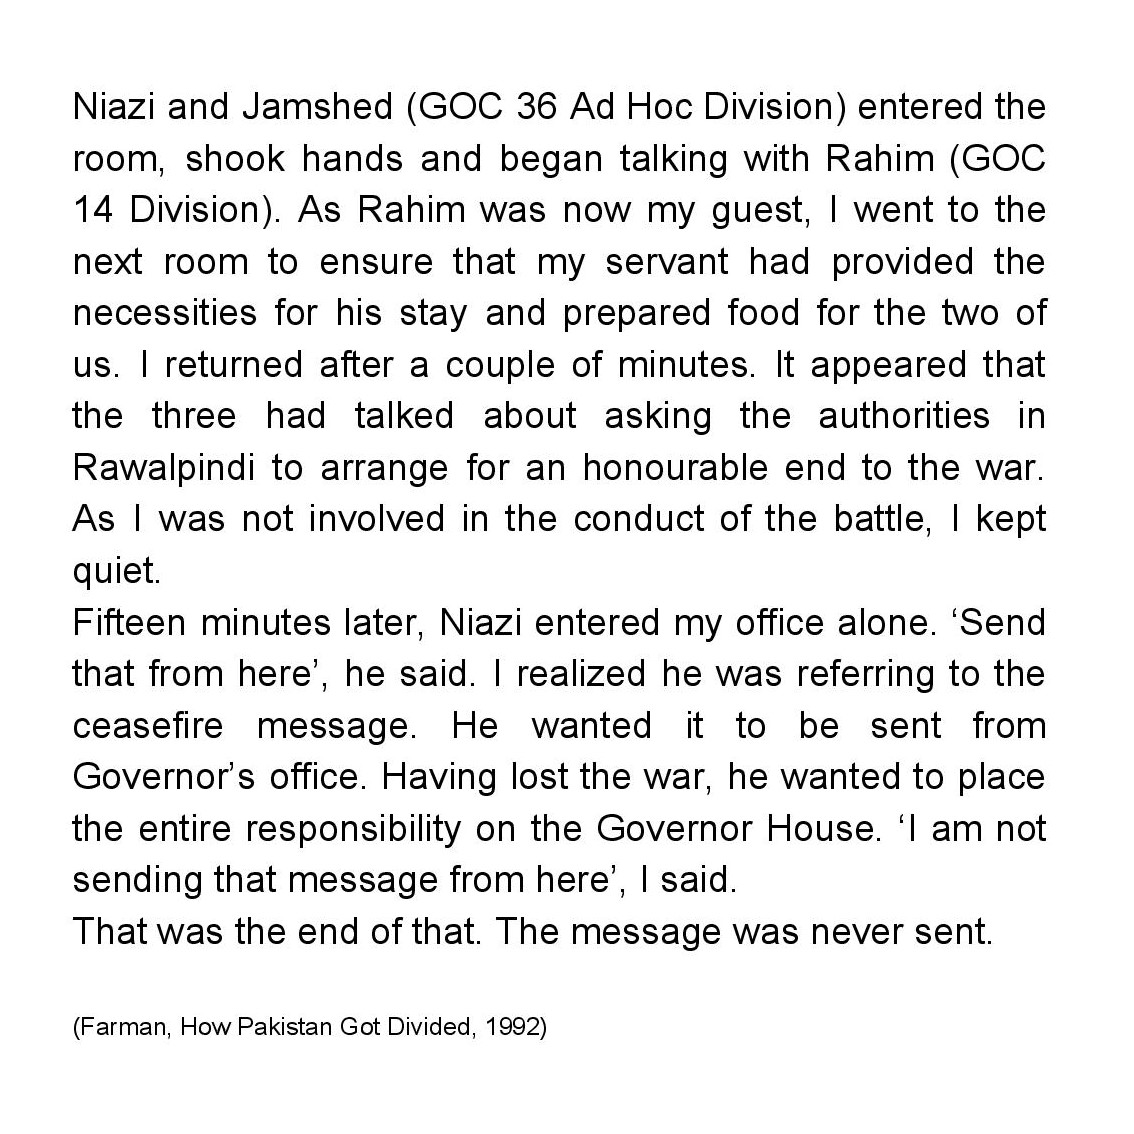 A ceasefire proposal was indeed sent from Governor Office, but then there's a tale of three Generals transpiring a ceasefire under coverTo top it all we have East Pakistan's top military brass playfully engaged in a "game of kitty" as Indians came knocking at Dhaka's doorsteps